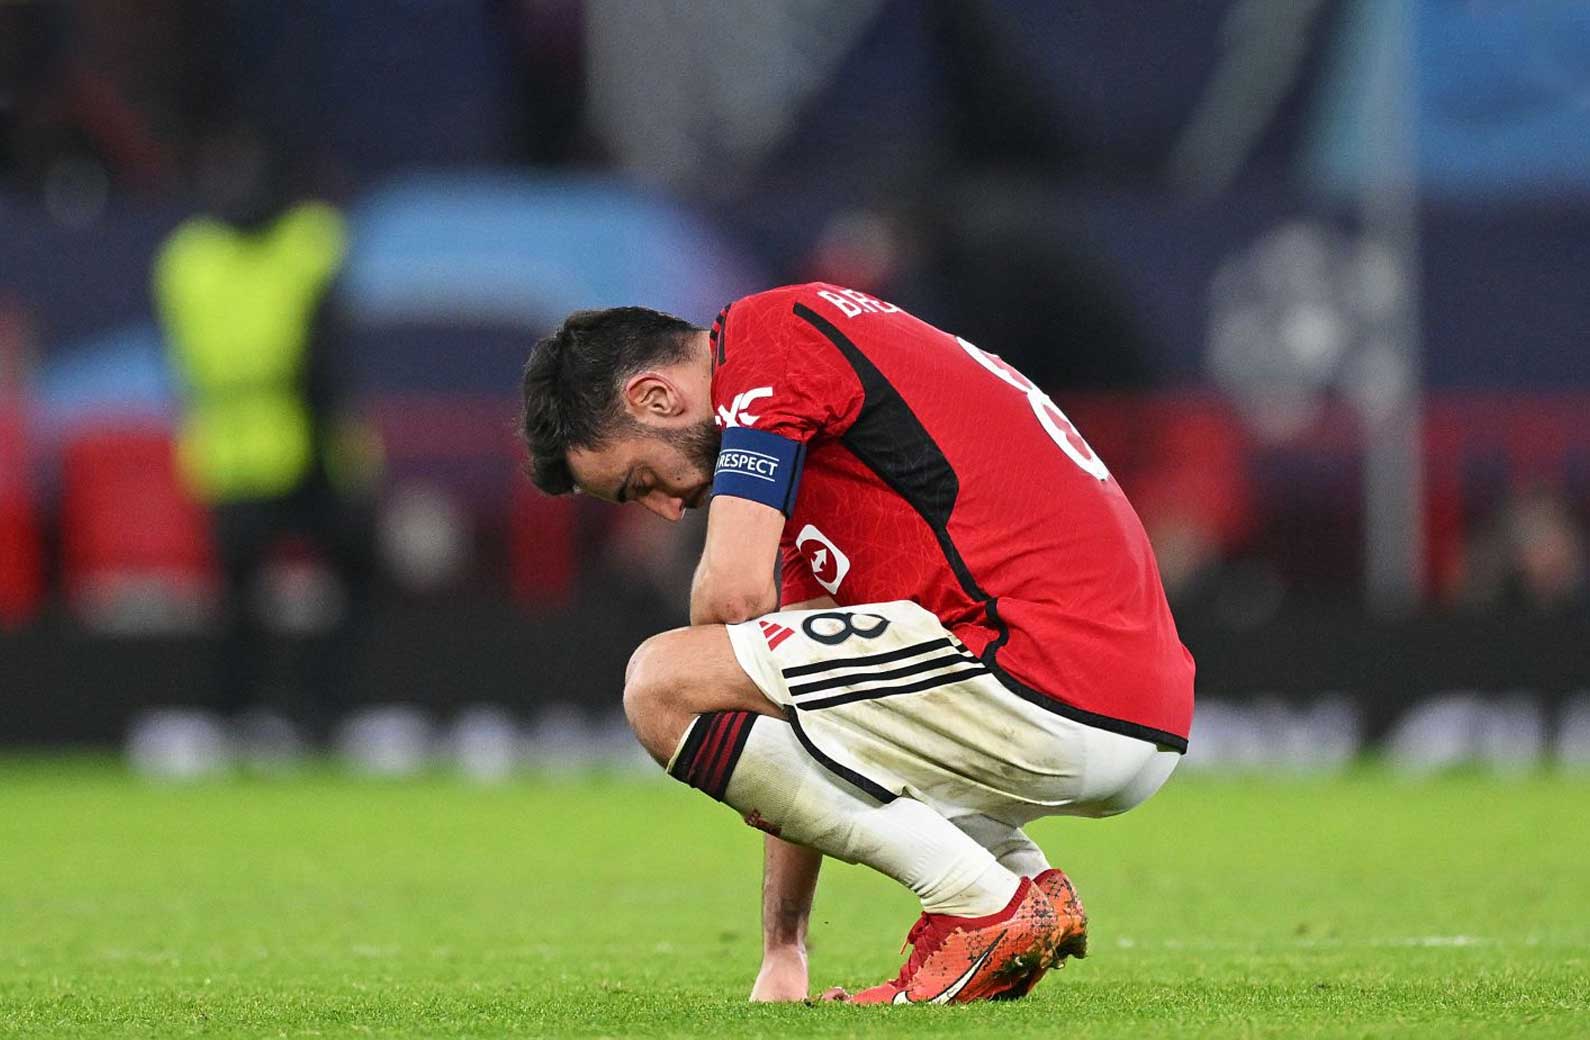 Player reaction on a soccer field after missing a scoring opportunity against Manchester City – a frustrating moment for Manchester United.